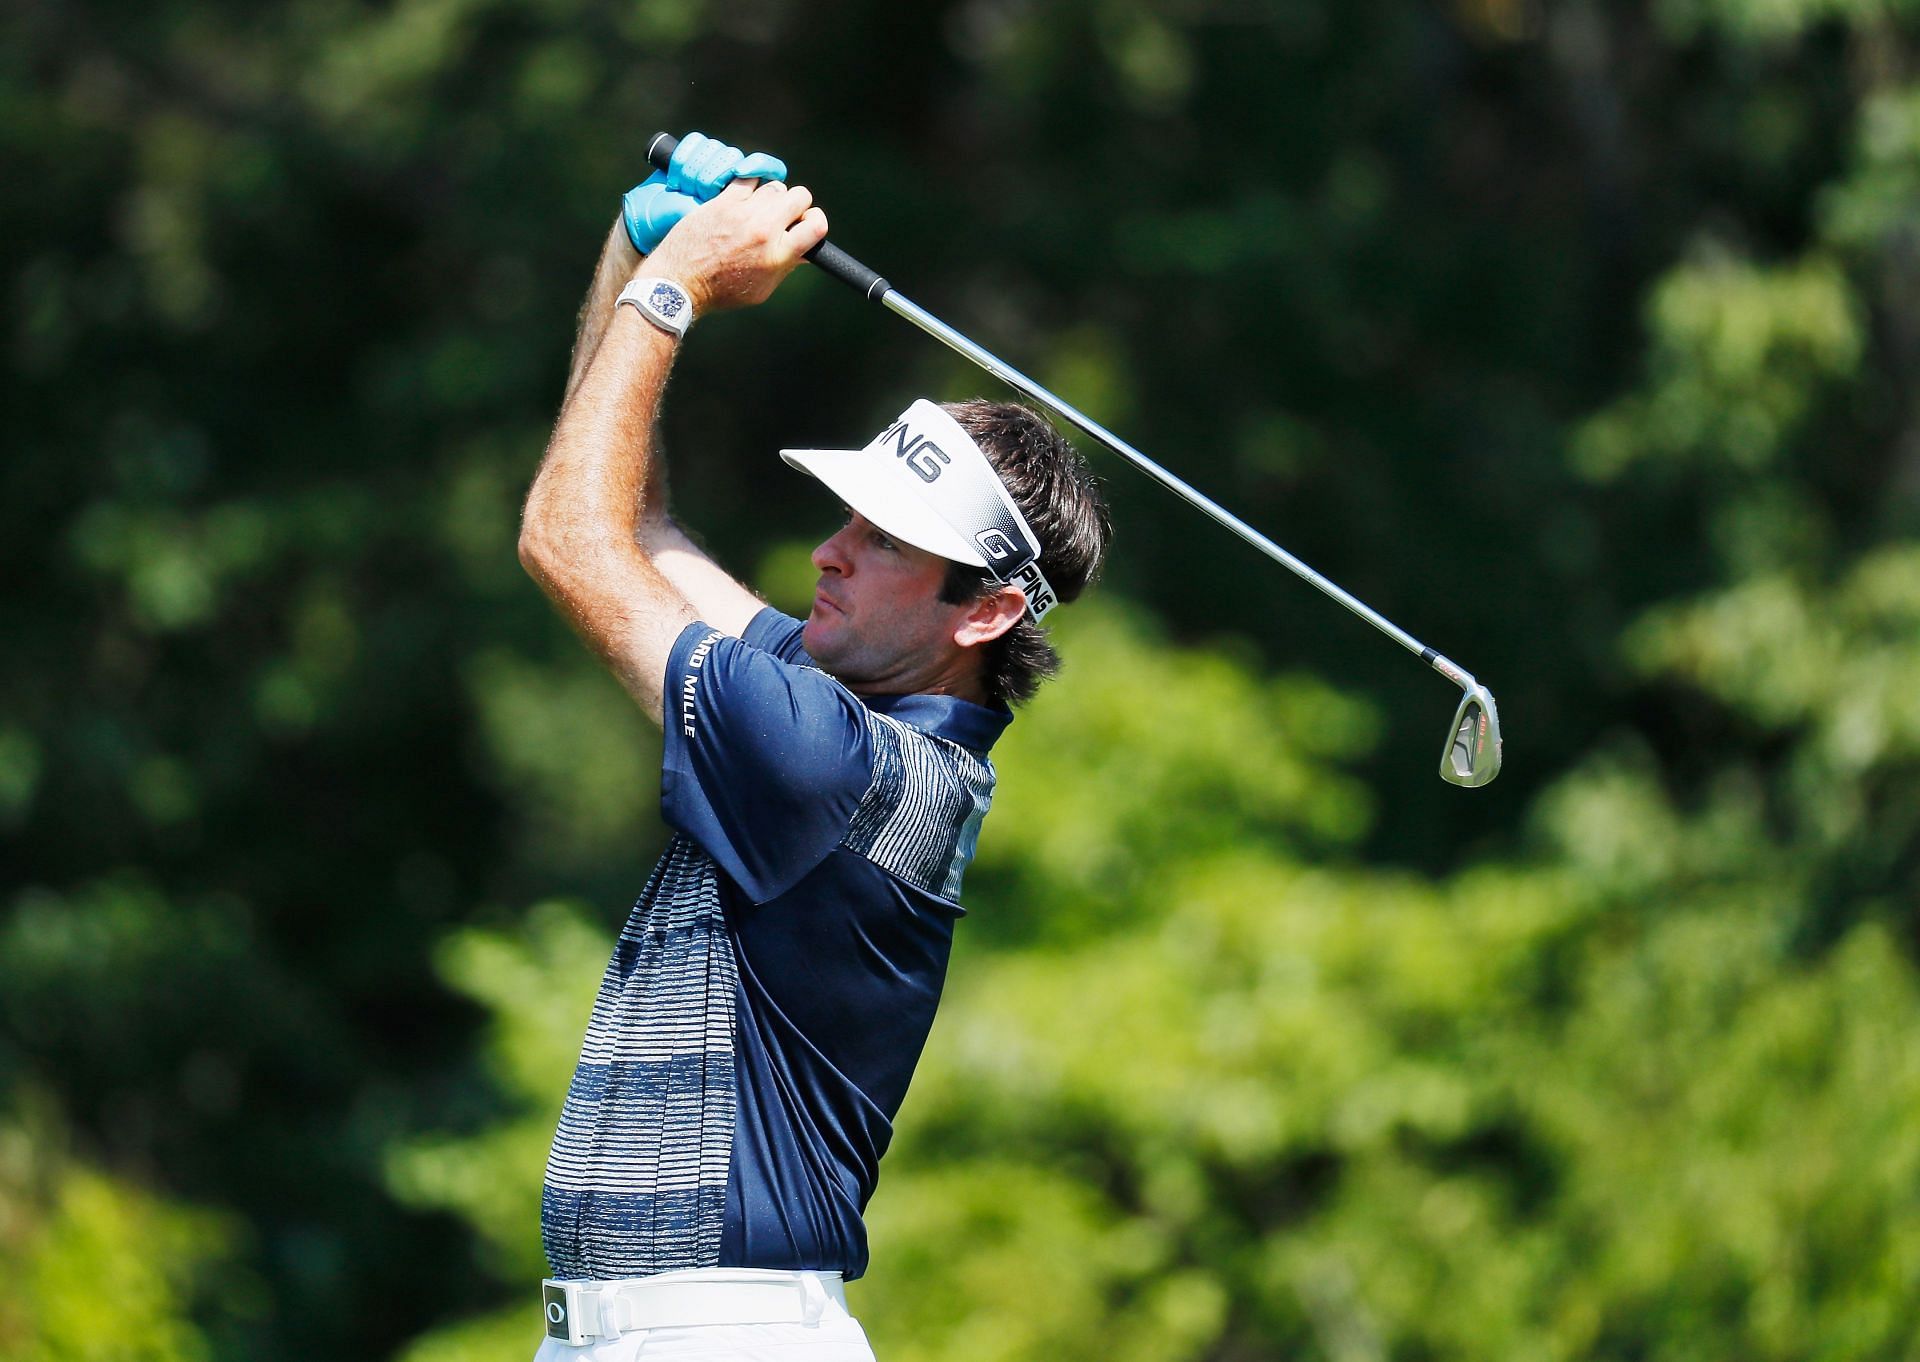 Bubba Watson at the PGA Tour - The Barclays in 2016 (Image via Getty)